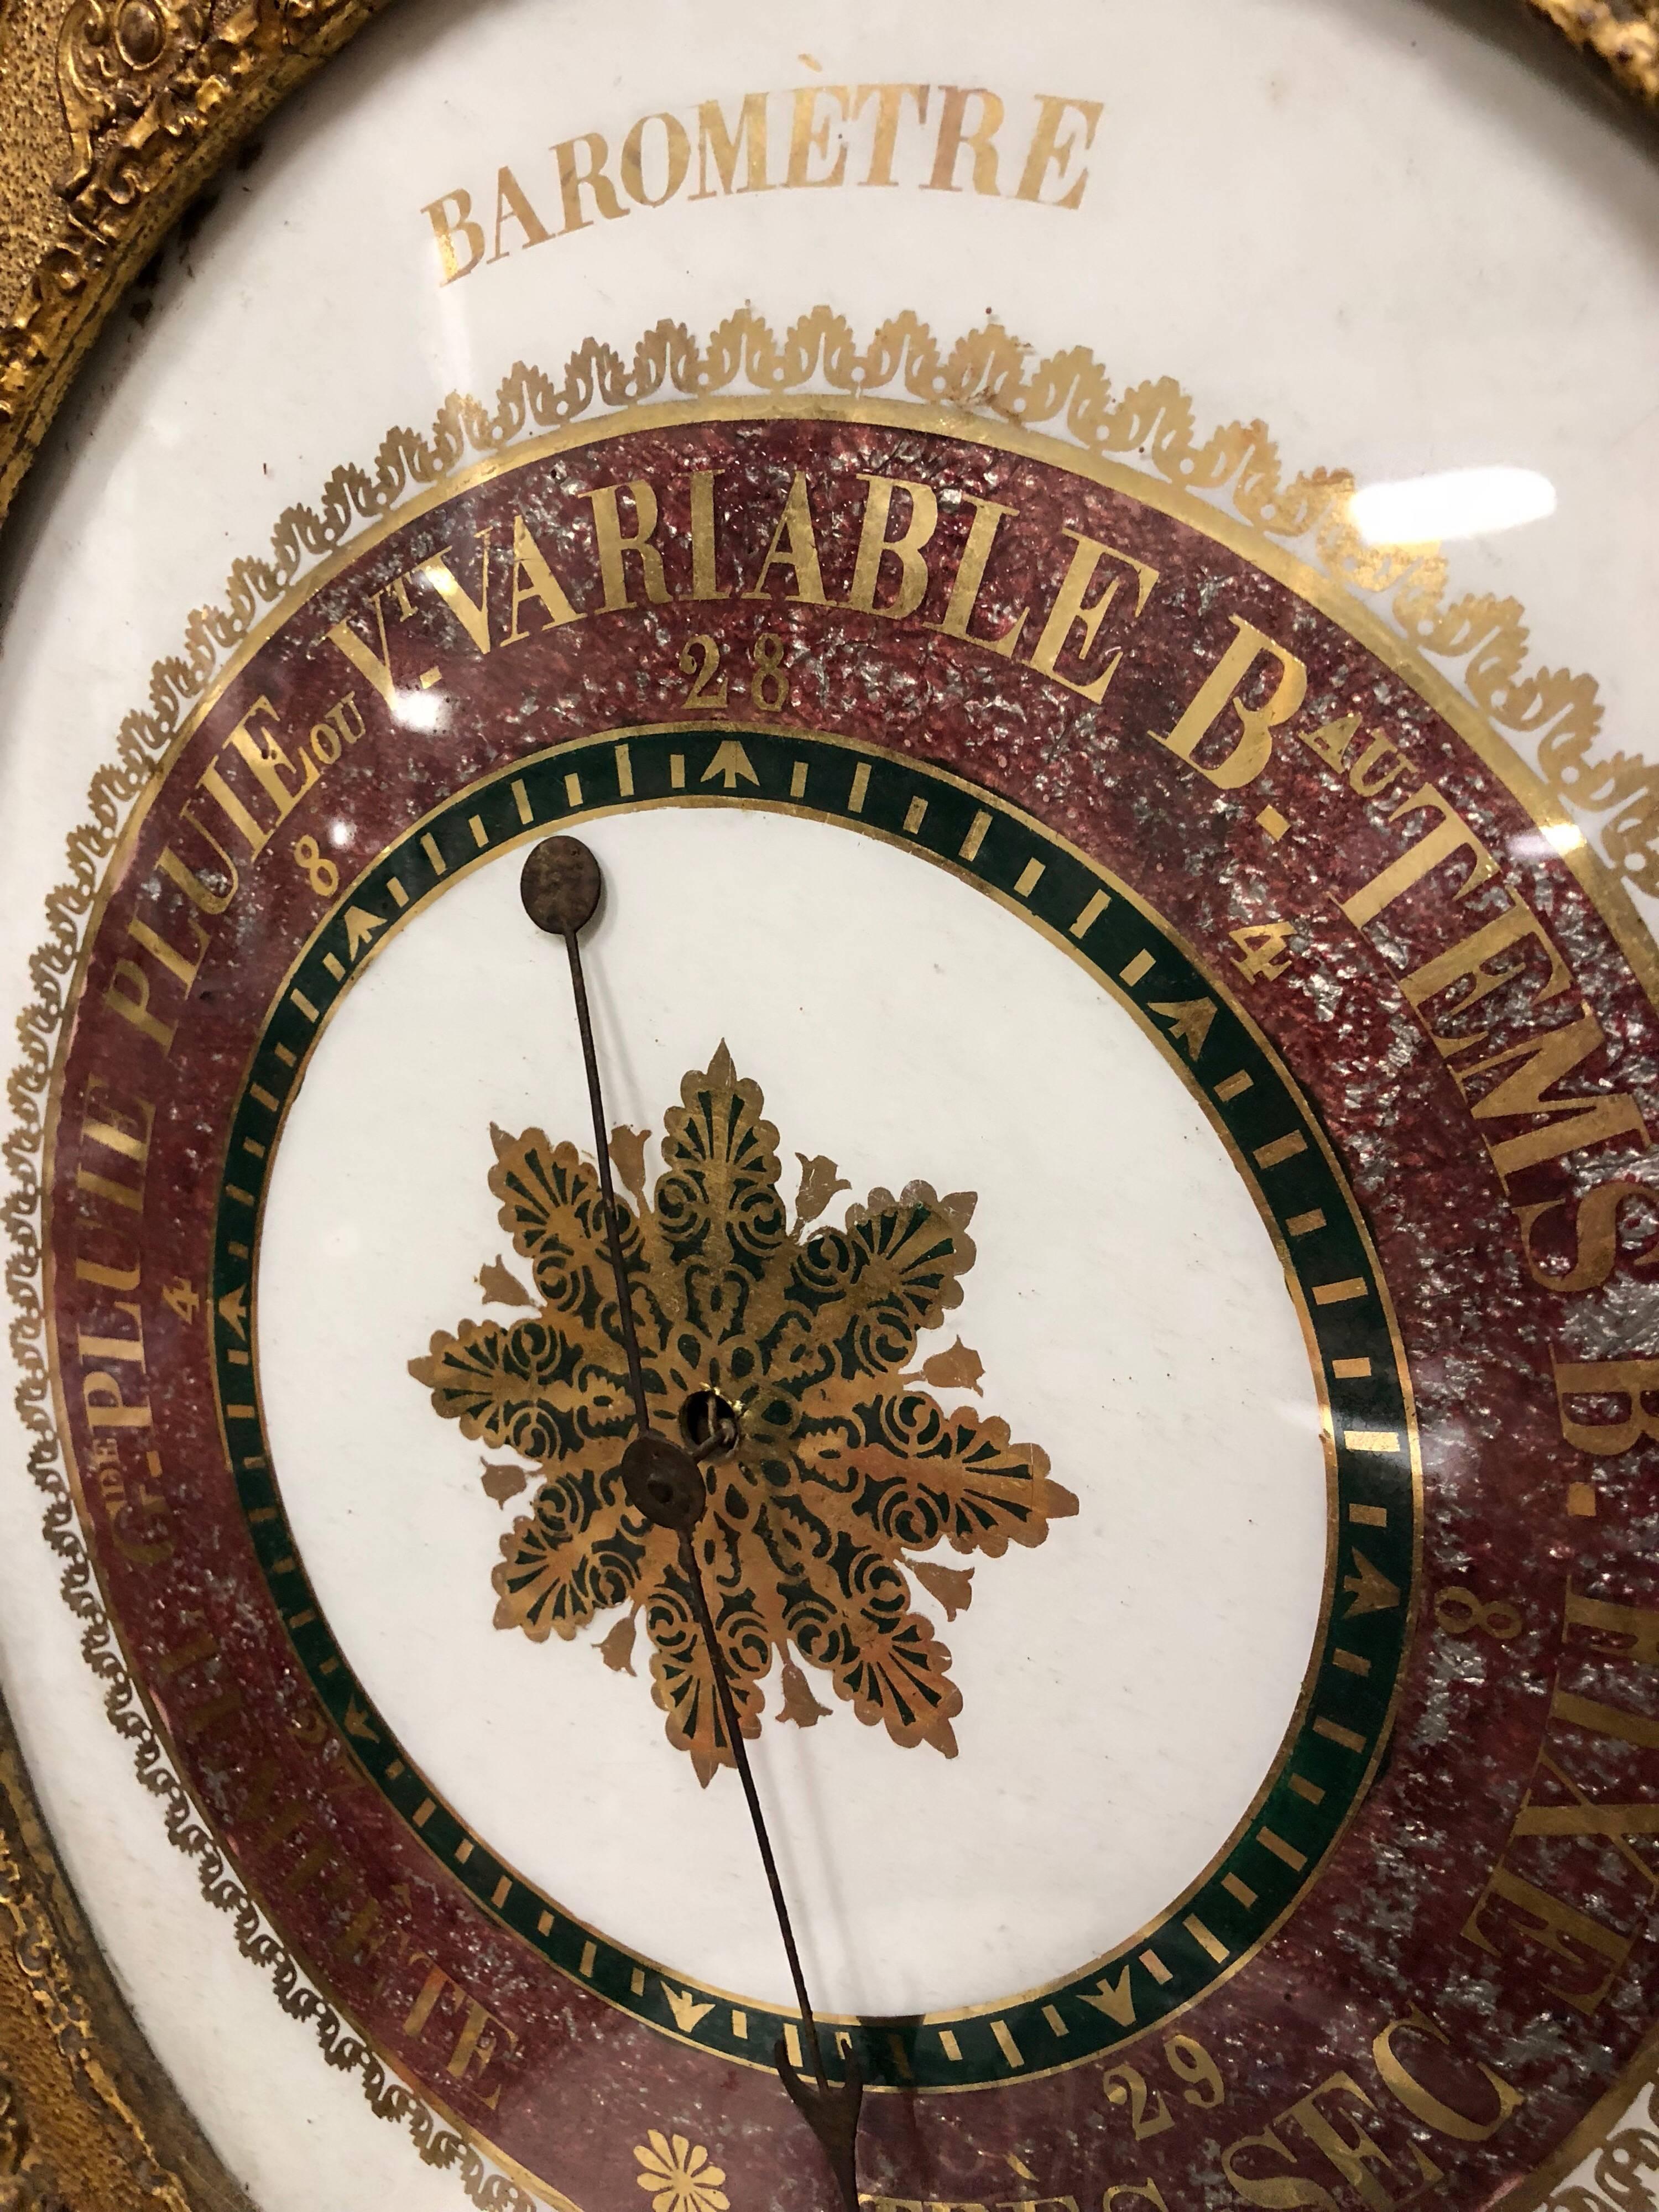 19th Century French Empire Gilt Barometer In Good Condition For Sale In Fairhope, AL